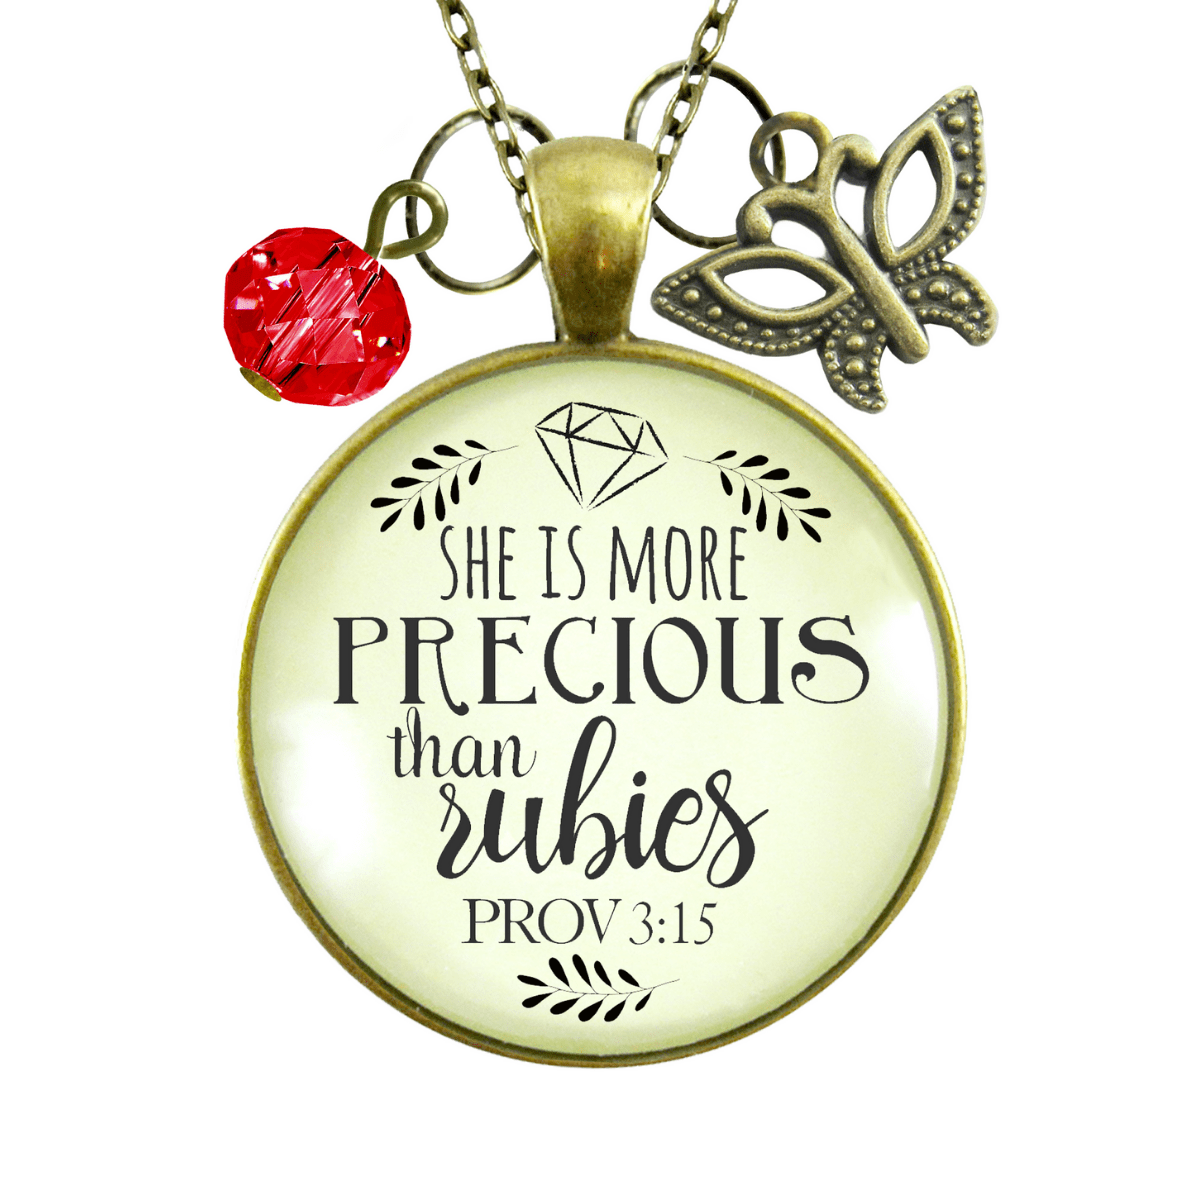 Gutsy Goodness She is More Precious Rubies Necklace Inspirational Faith Jewelry - Gutsy Goodness Handmade Jewelry;She Is More Precious Than Rubies - Gutsy Goodness Handmade Jewelry Gifts